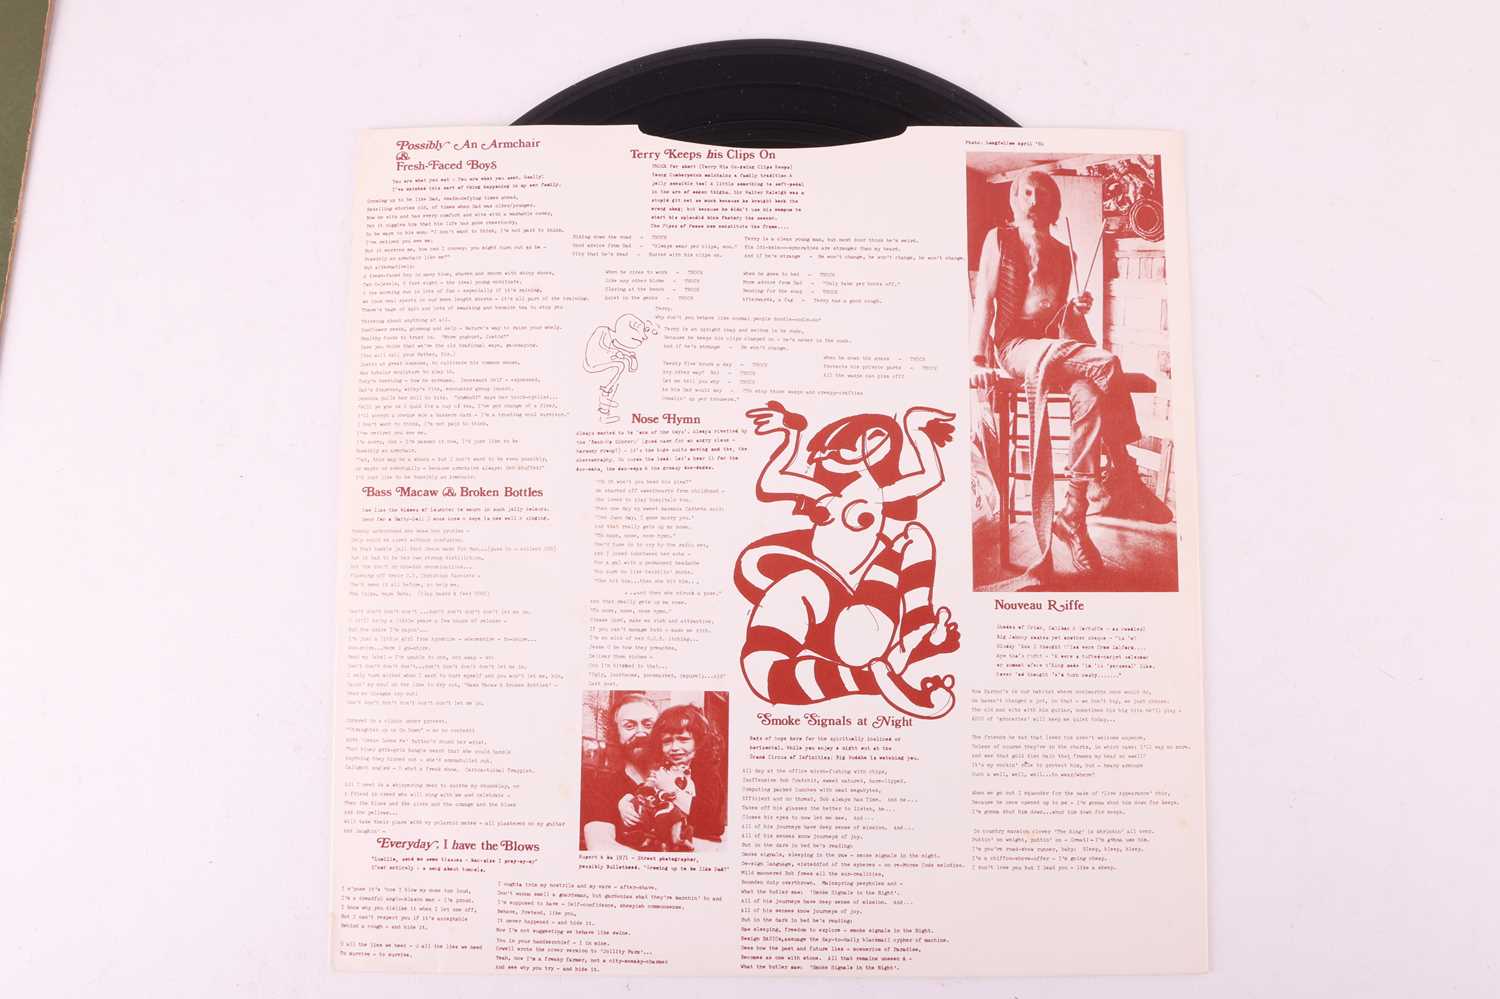 From the personal collection of Vivian Stanshall, an original release of the album 'Sir Henry at Raw - Image 4 of 6